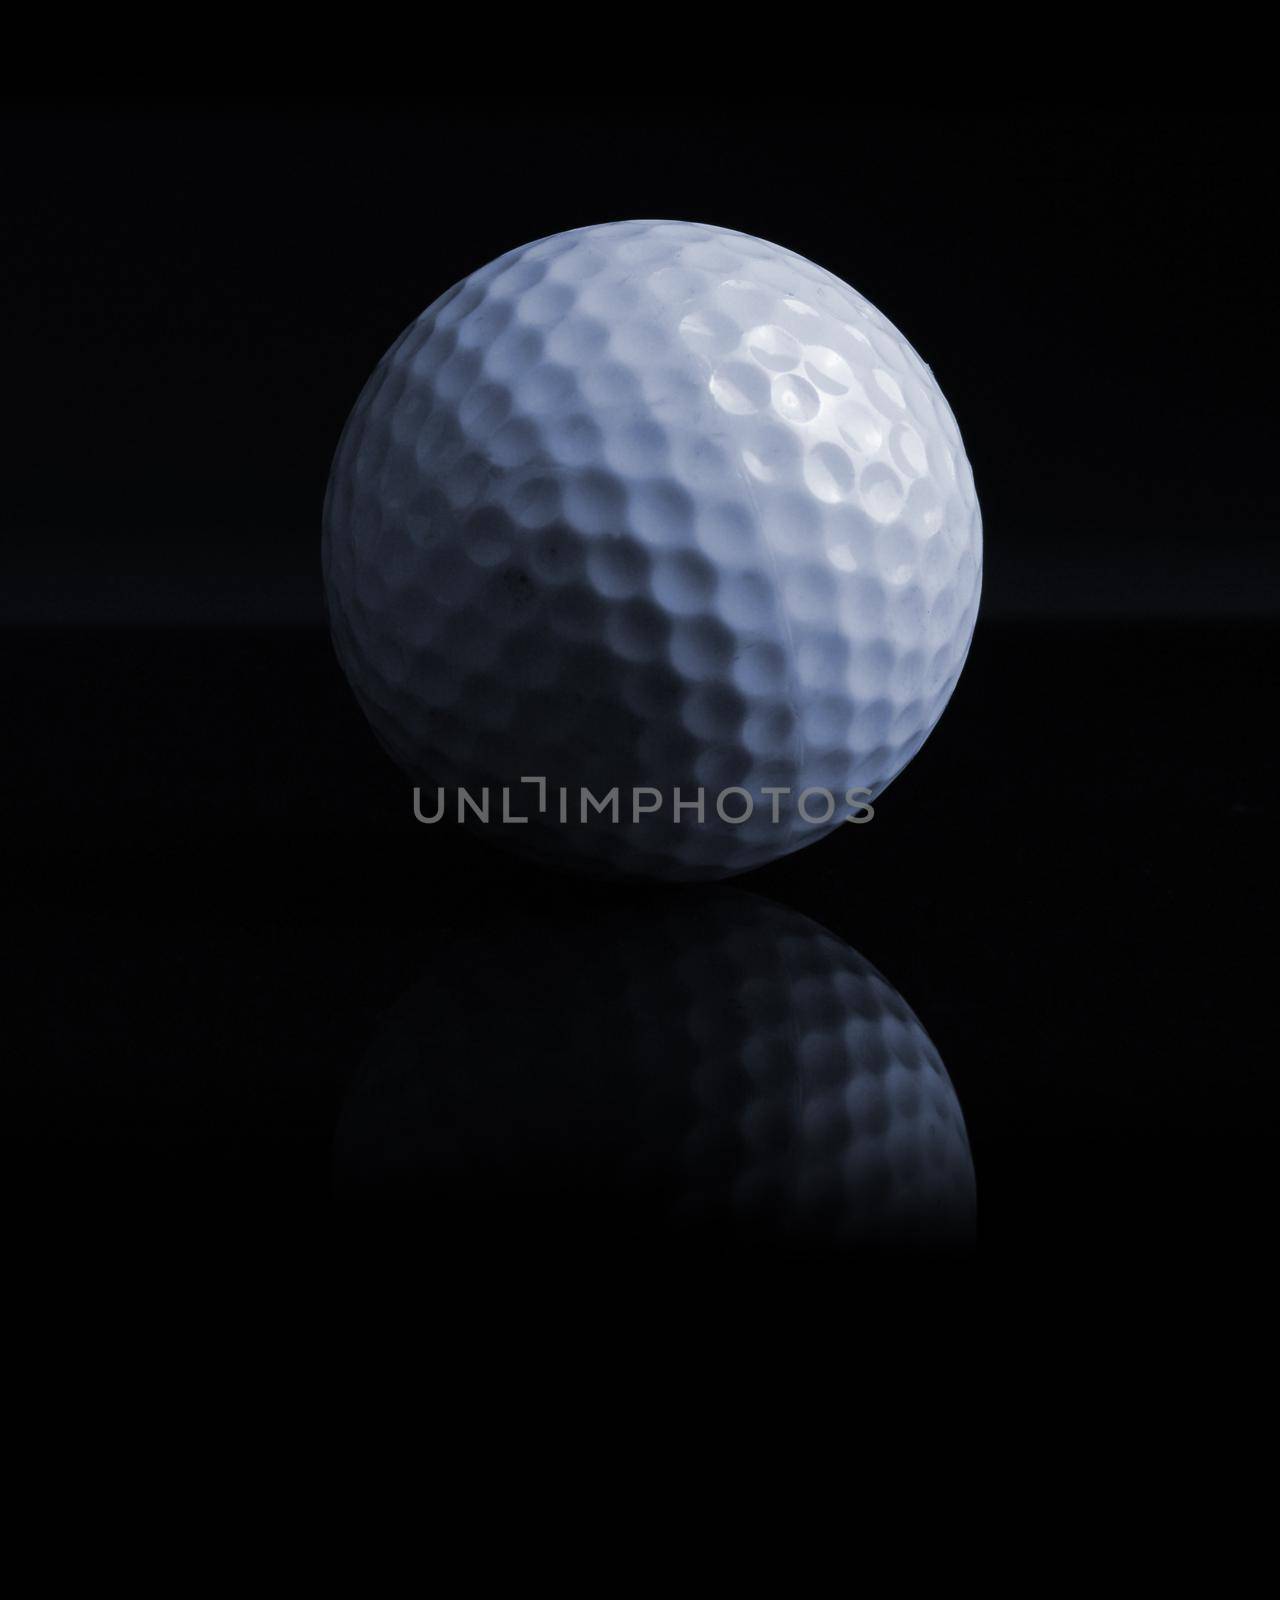 An isolated over black reflective surface of a common golf ball showing the details using shadow and light contrast.